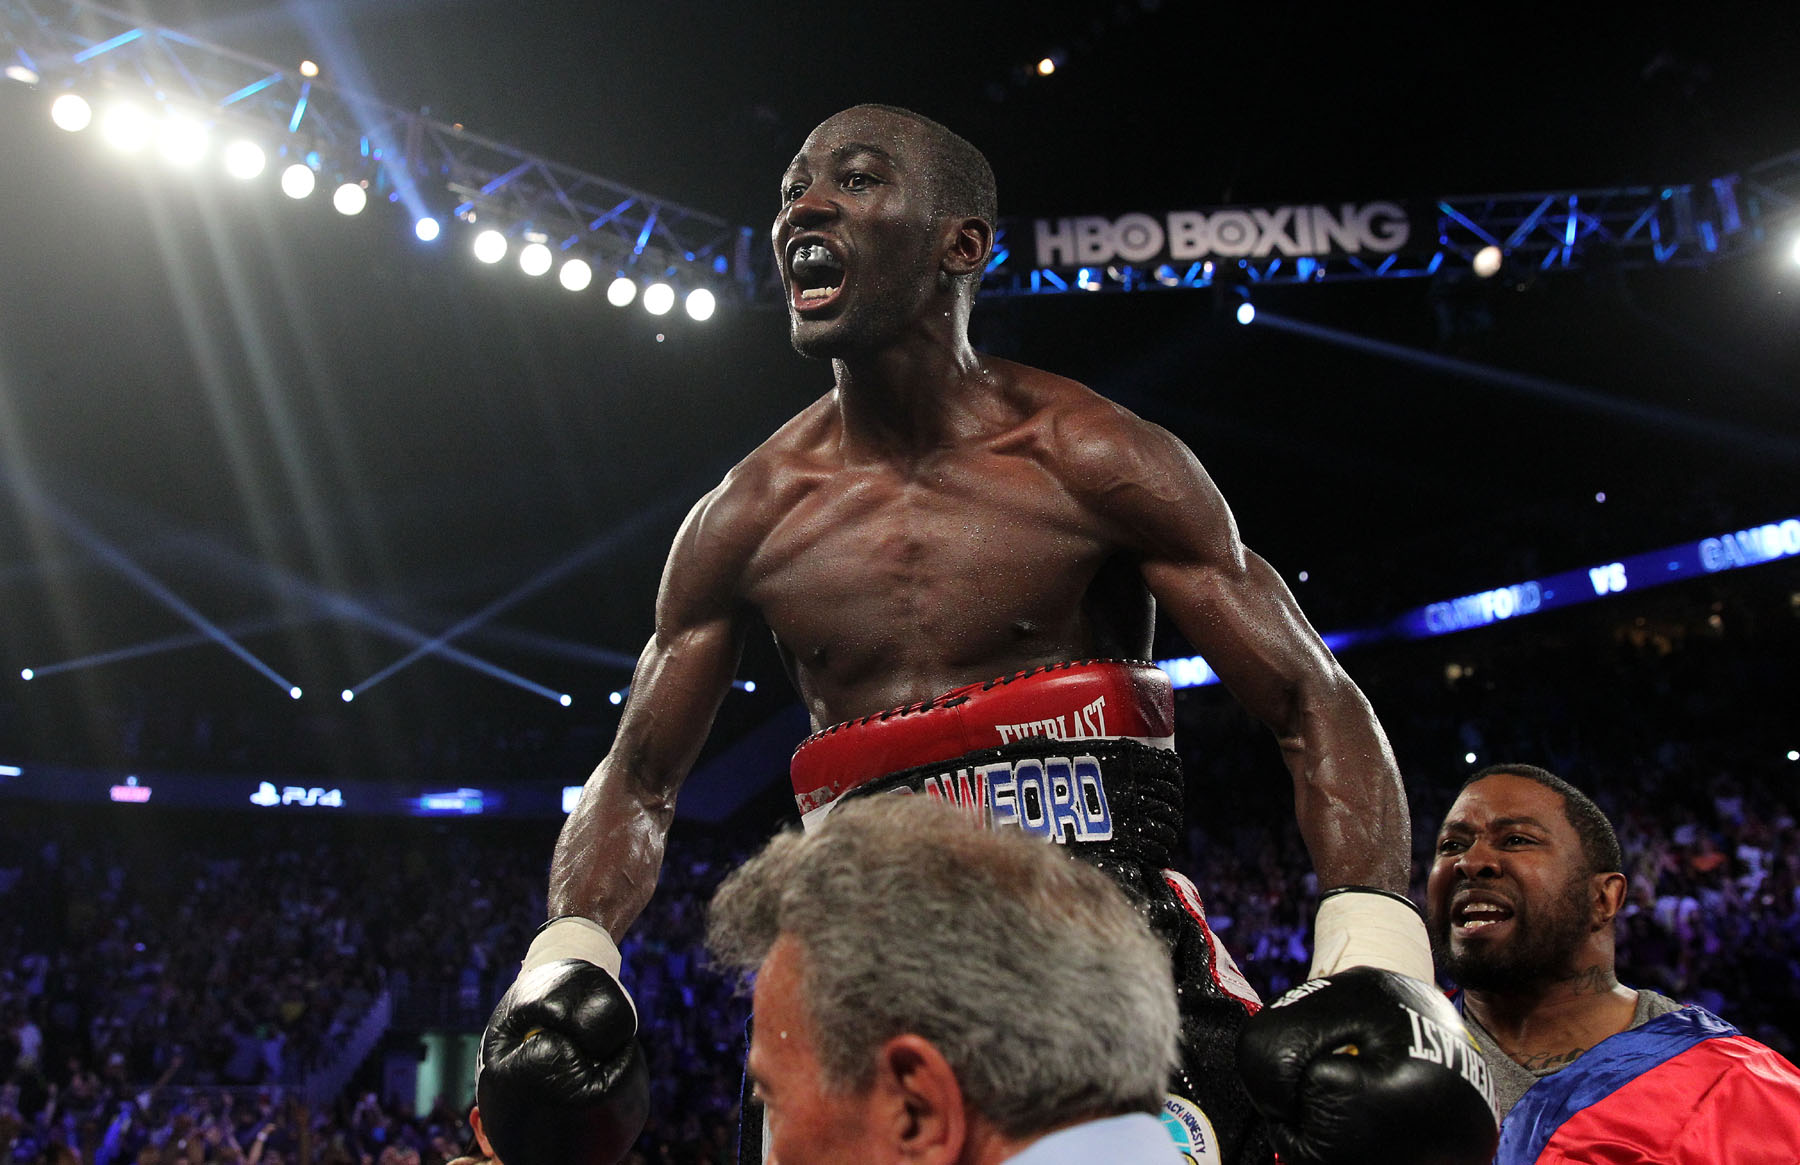 Is Bud Crawford Being Avoided?